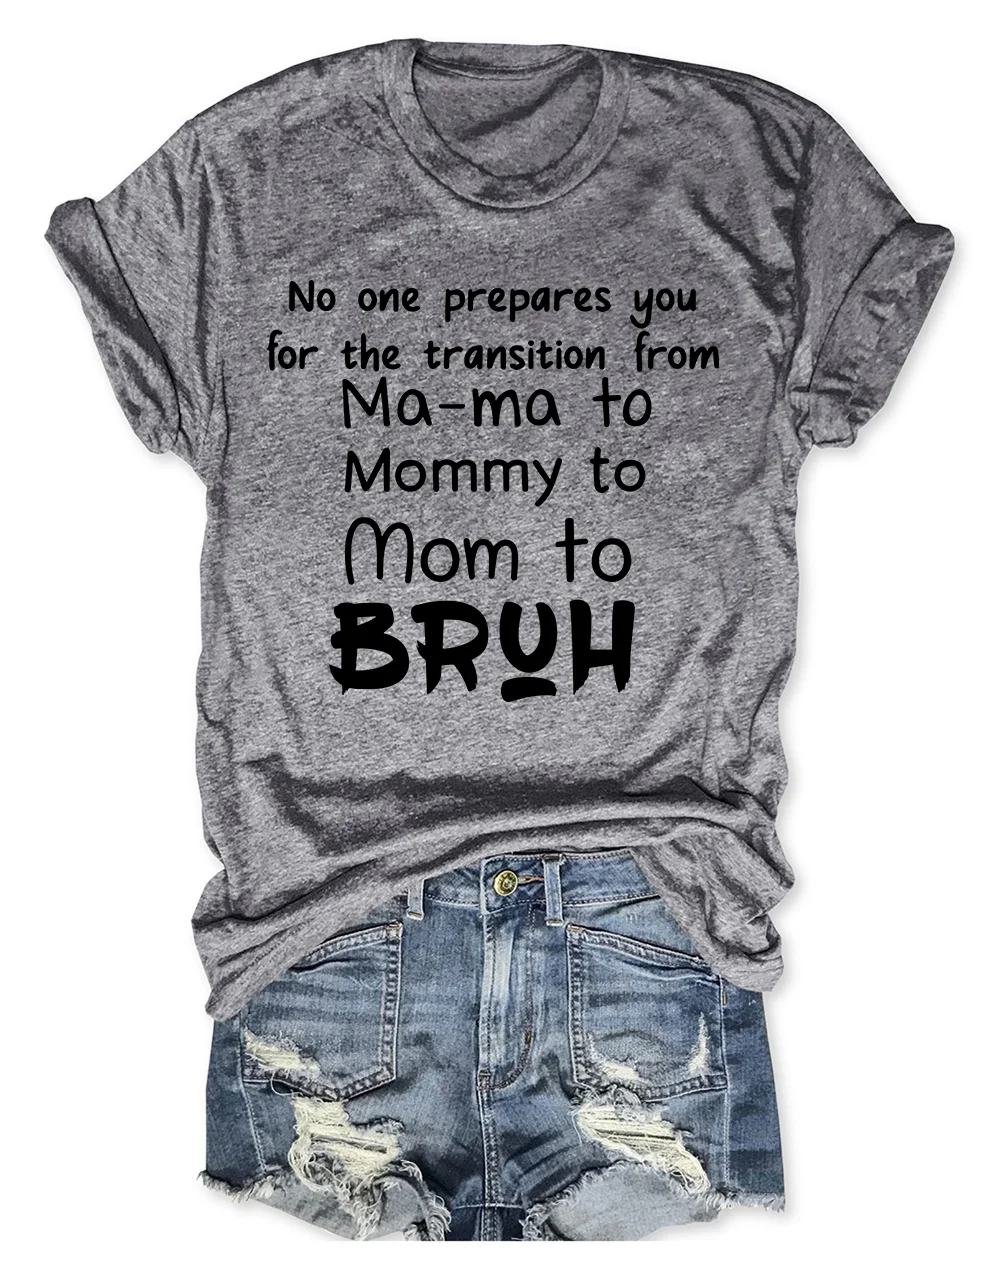 Ma-ma To Mommy To Mom To Bruh T-Shirt